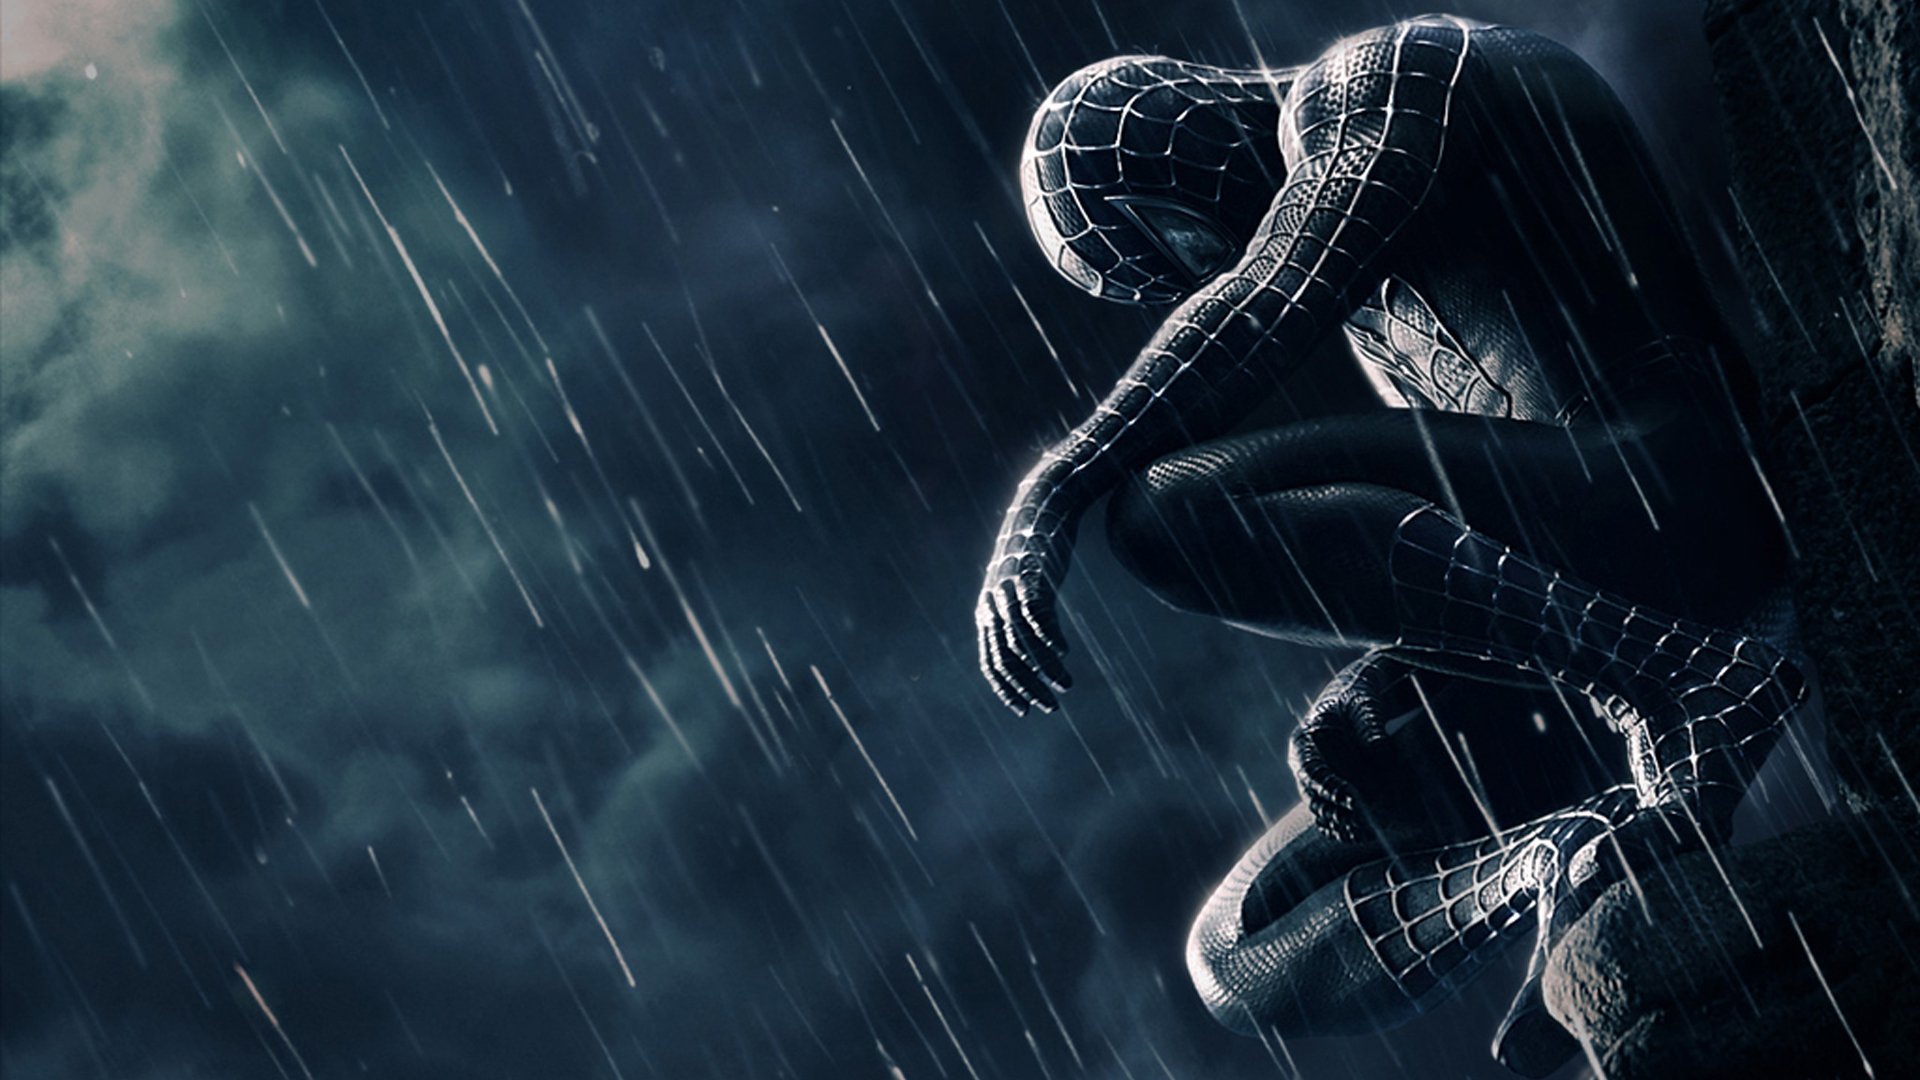 spiderman wallpaper hd,cg artwork,fictional character,darkness,space,graphics